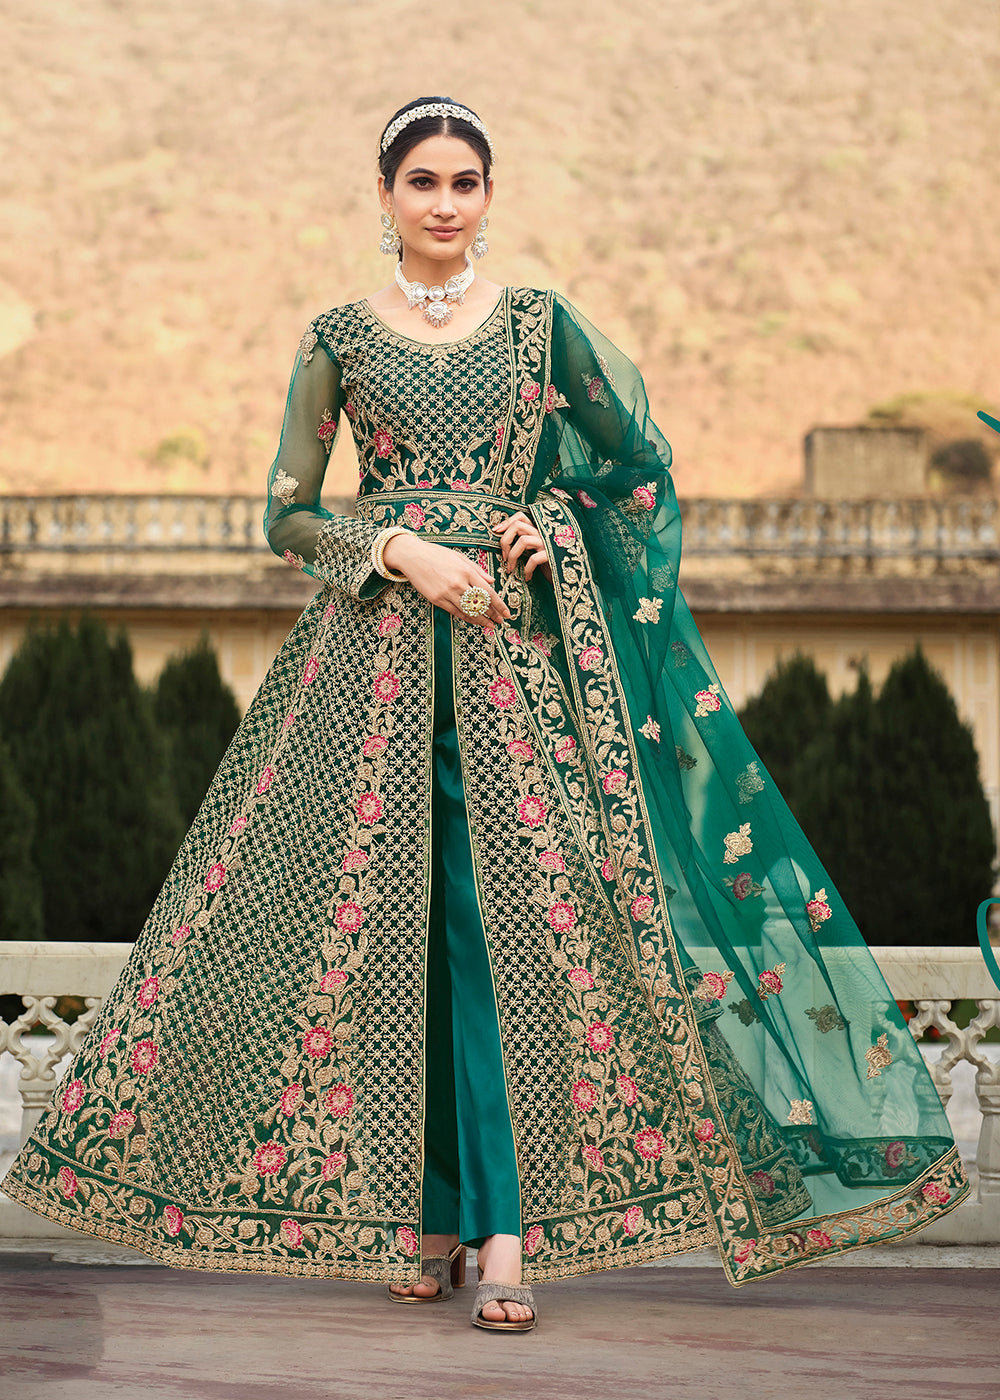 Buy Now Special Cord & Stone Work Green Slit Style Anarkali Suit Online in USA, UK, Australia, New Zealand, Canada, Italy & Worldwide at Empress Clothing. 